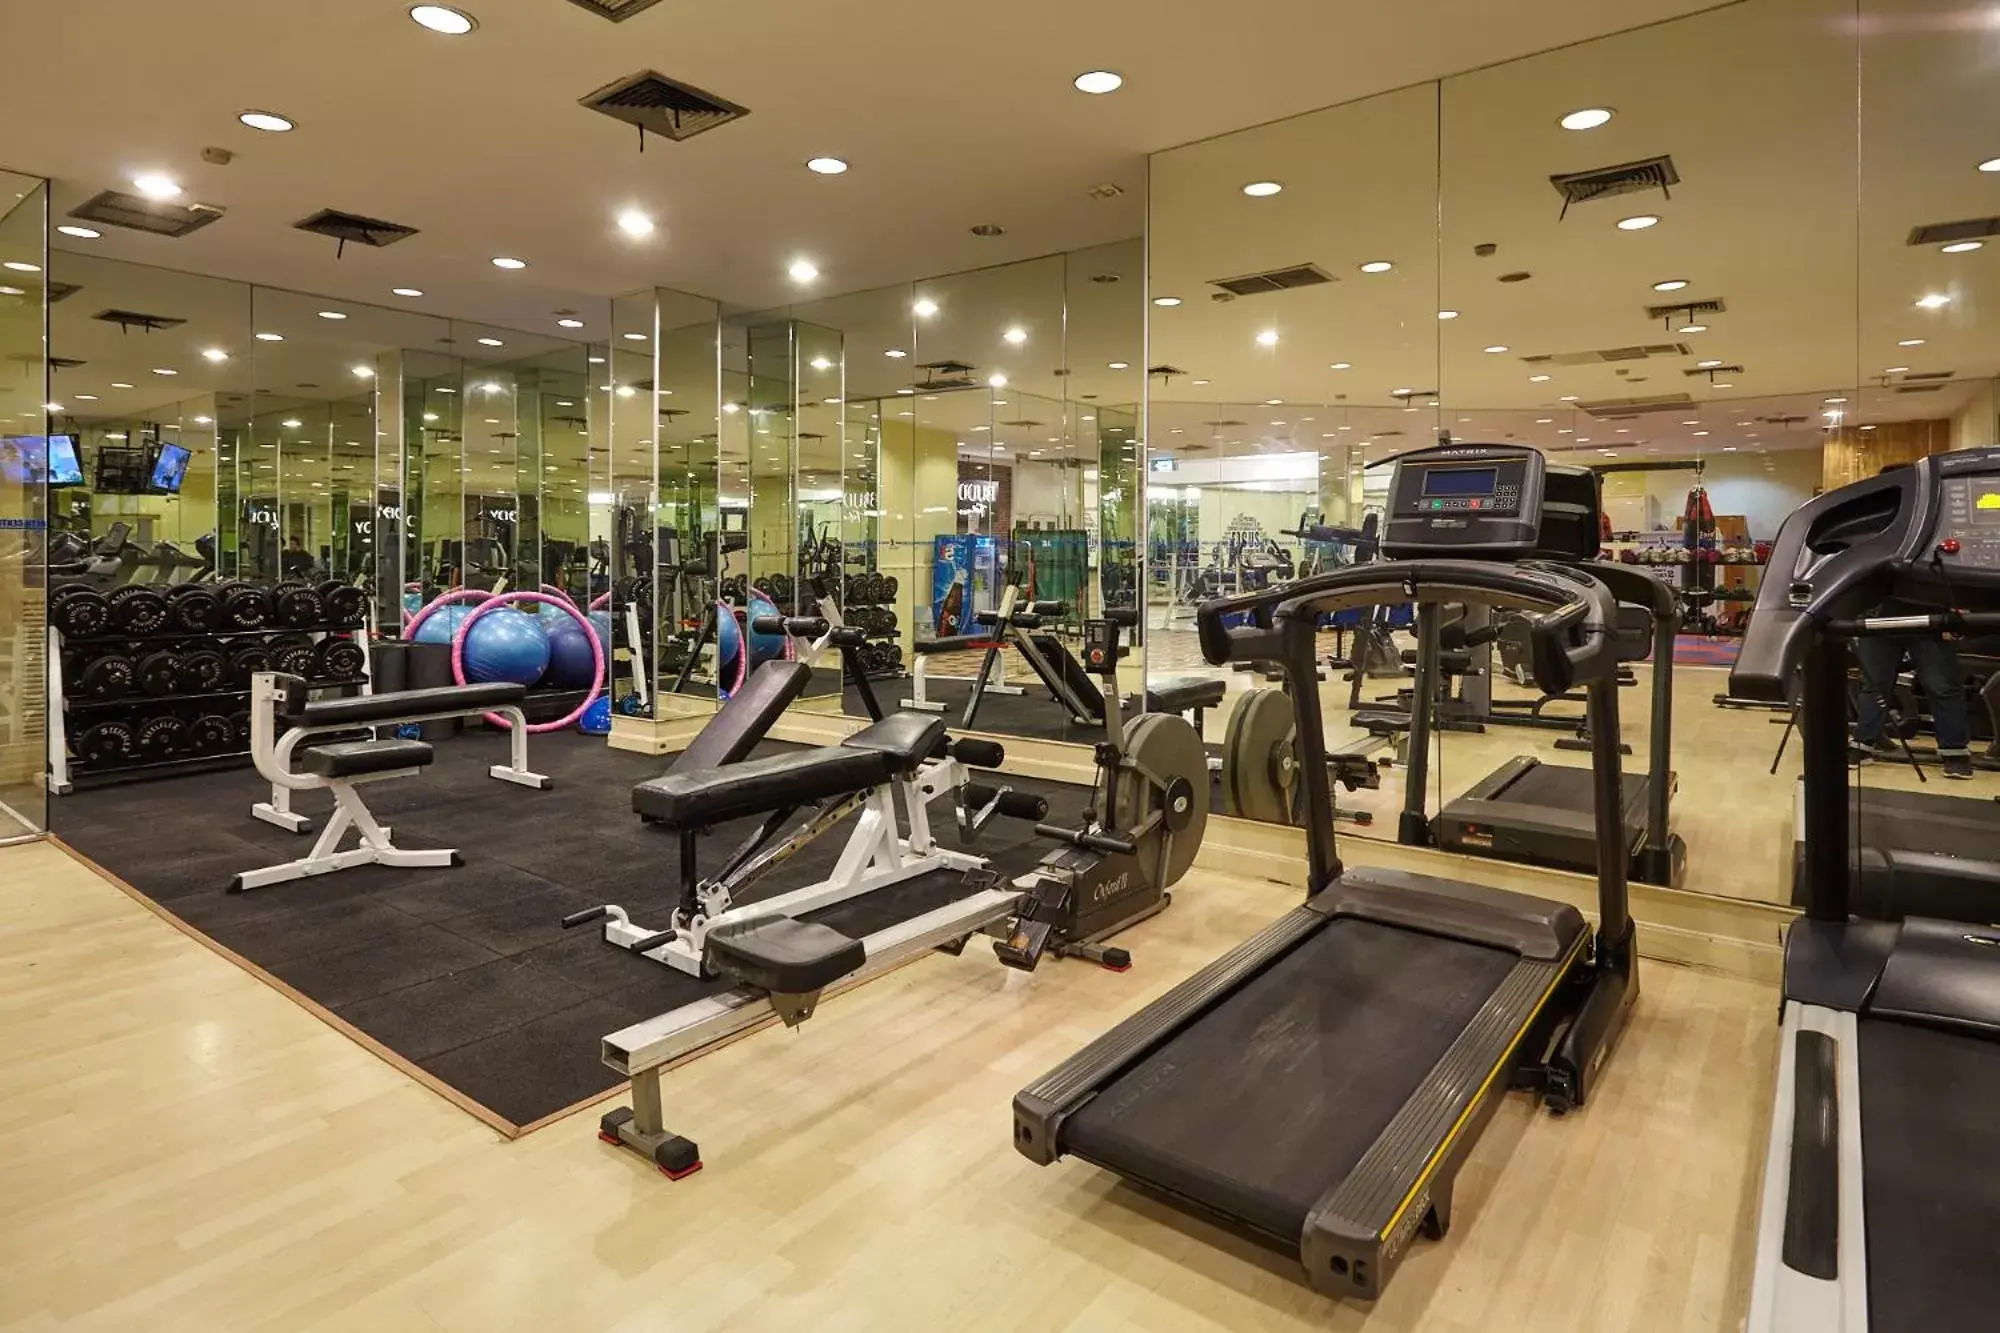 Fitness centre/facilities, Fitness Center/Facilities in Buddy Lodge, Khaosan Road